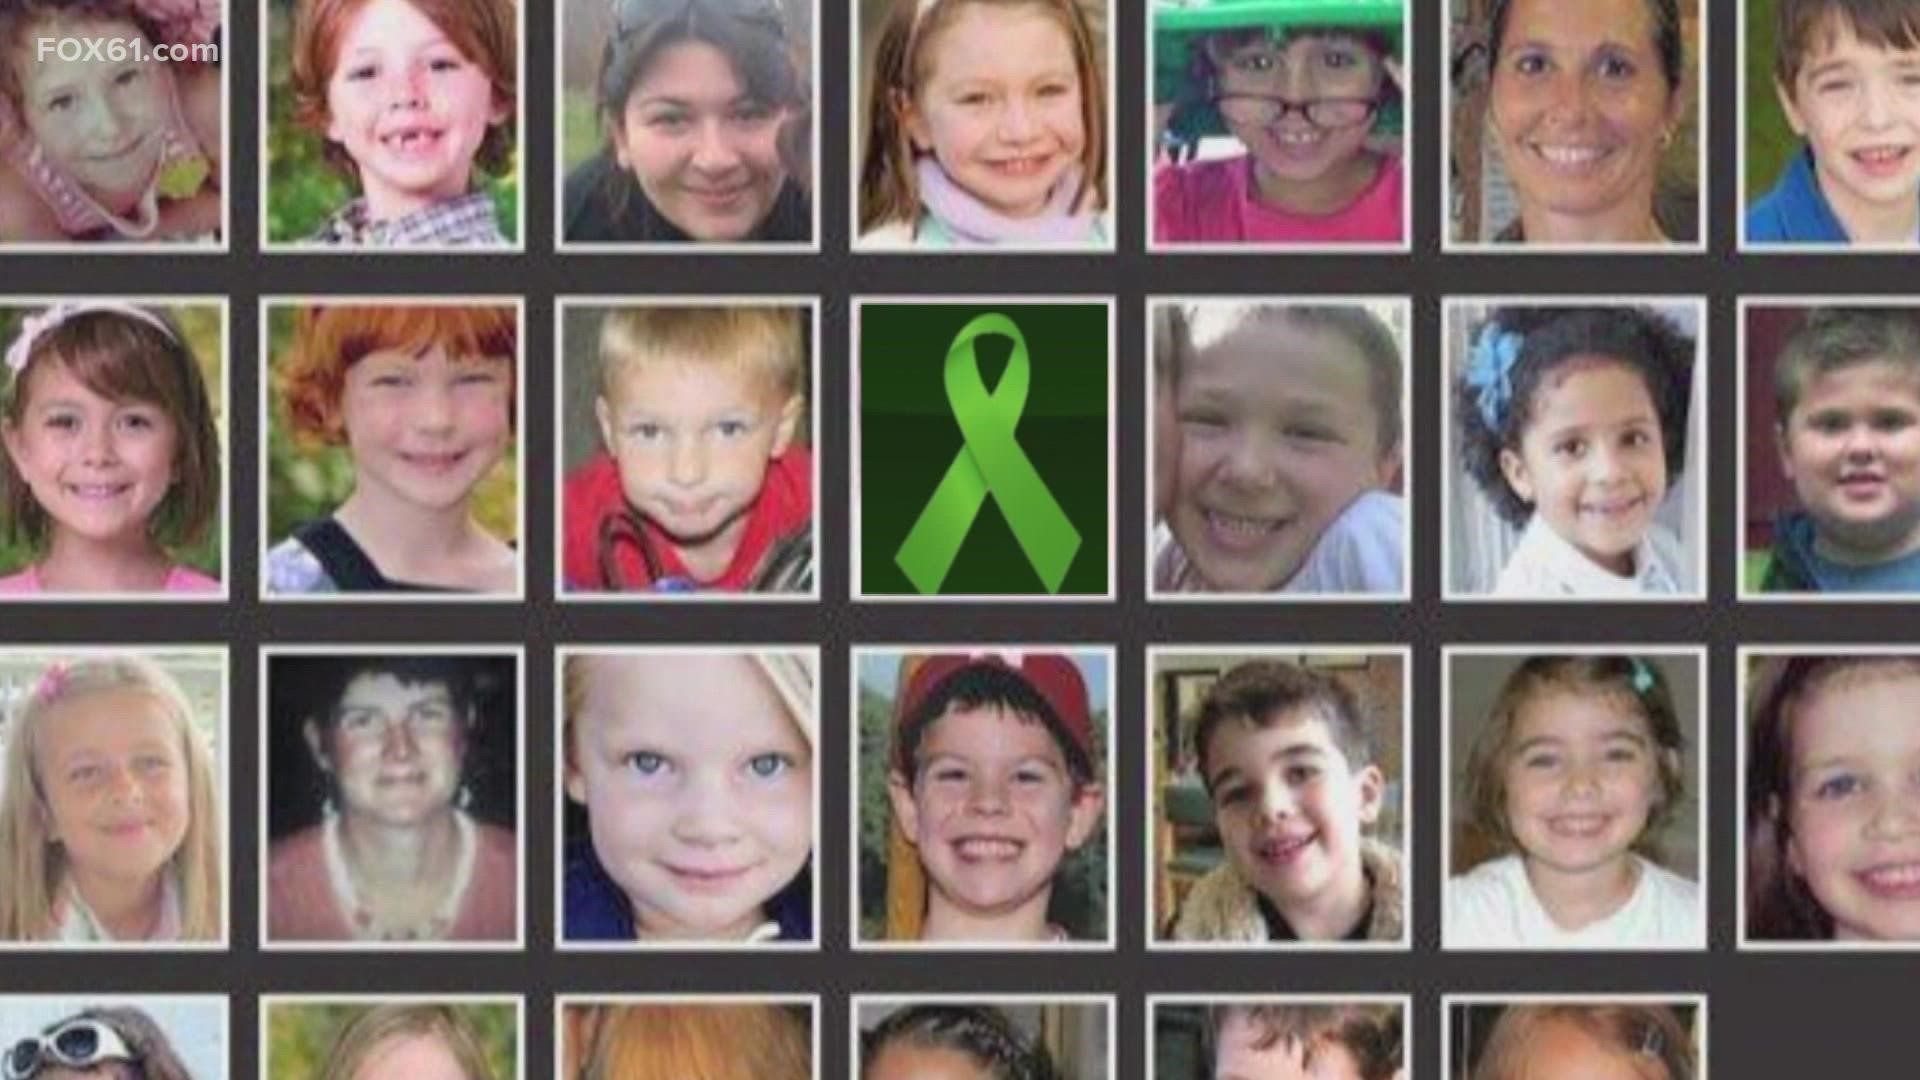 Connecticut remembered and honored the victims of the Sandy Hook tragedy on the 9th anniversary.